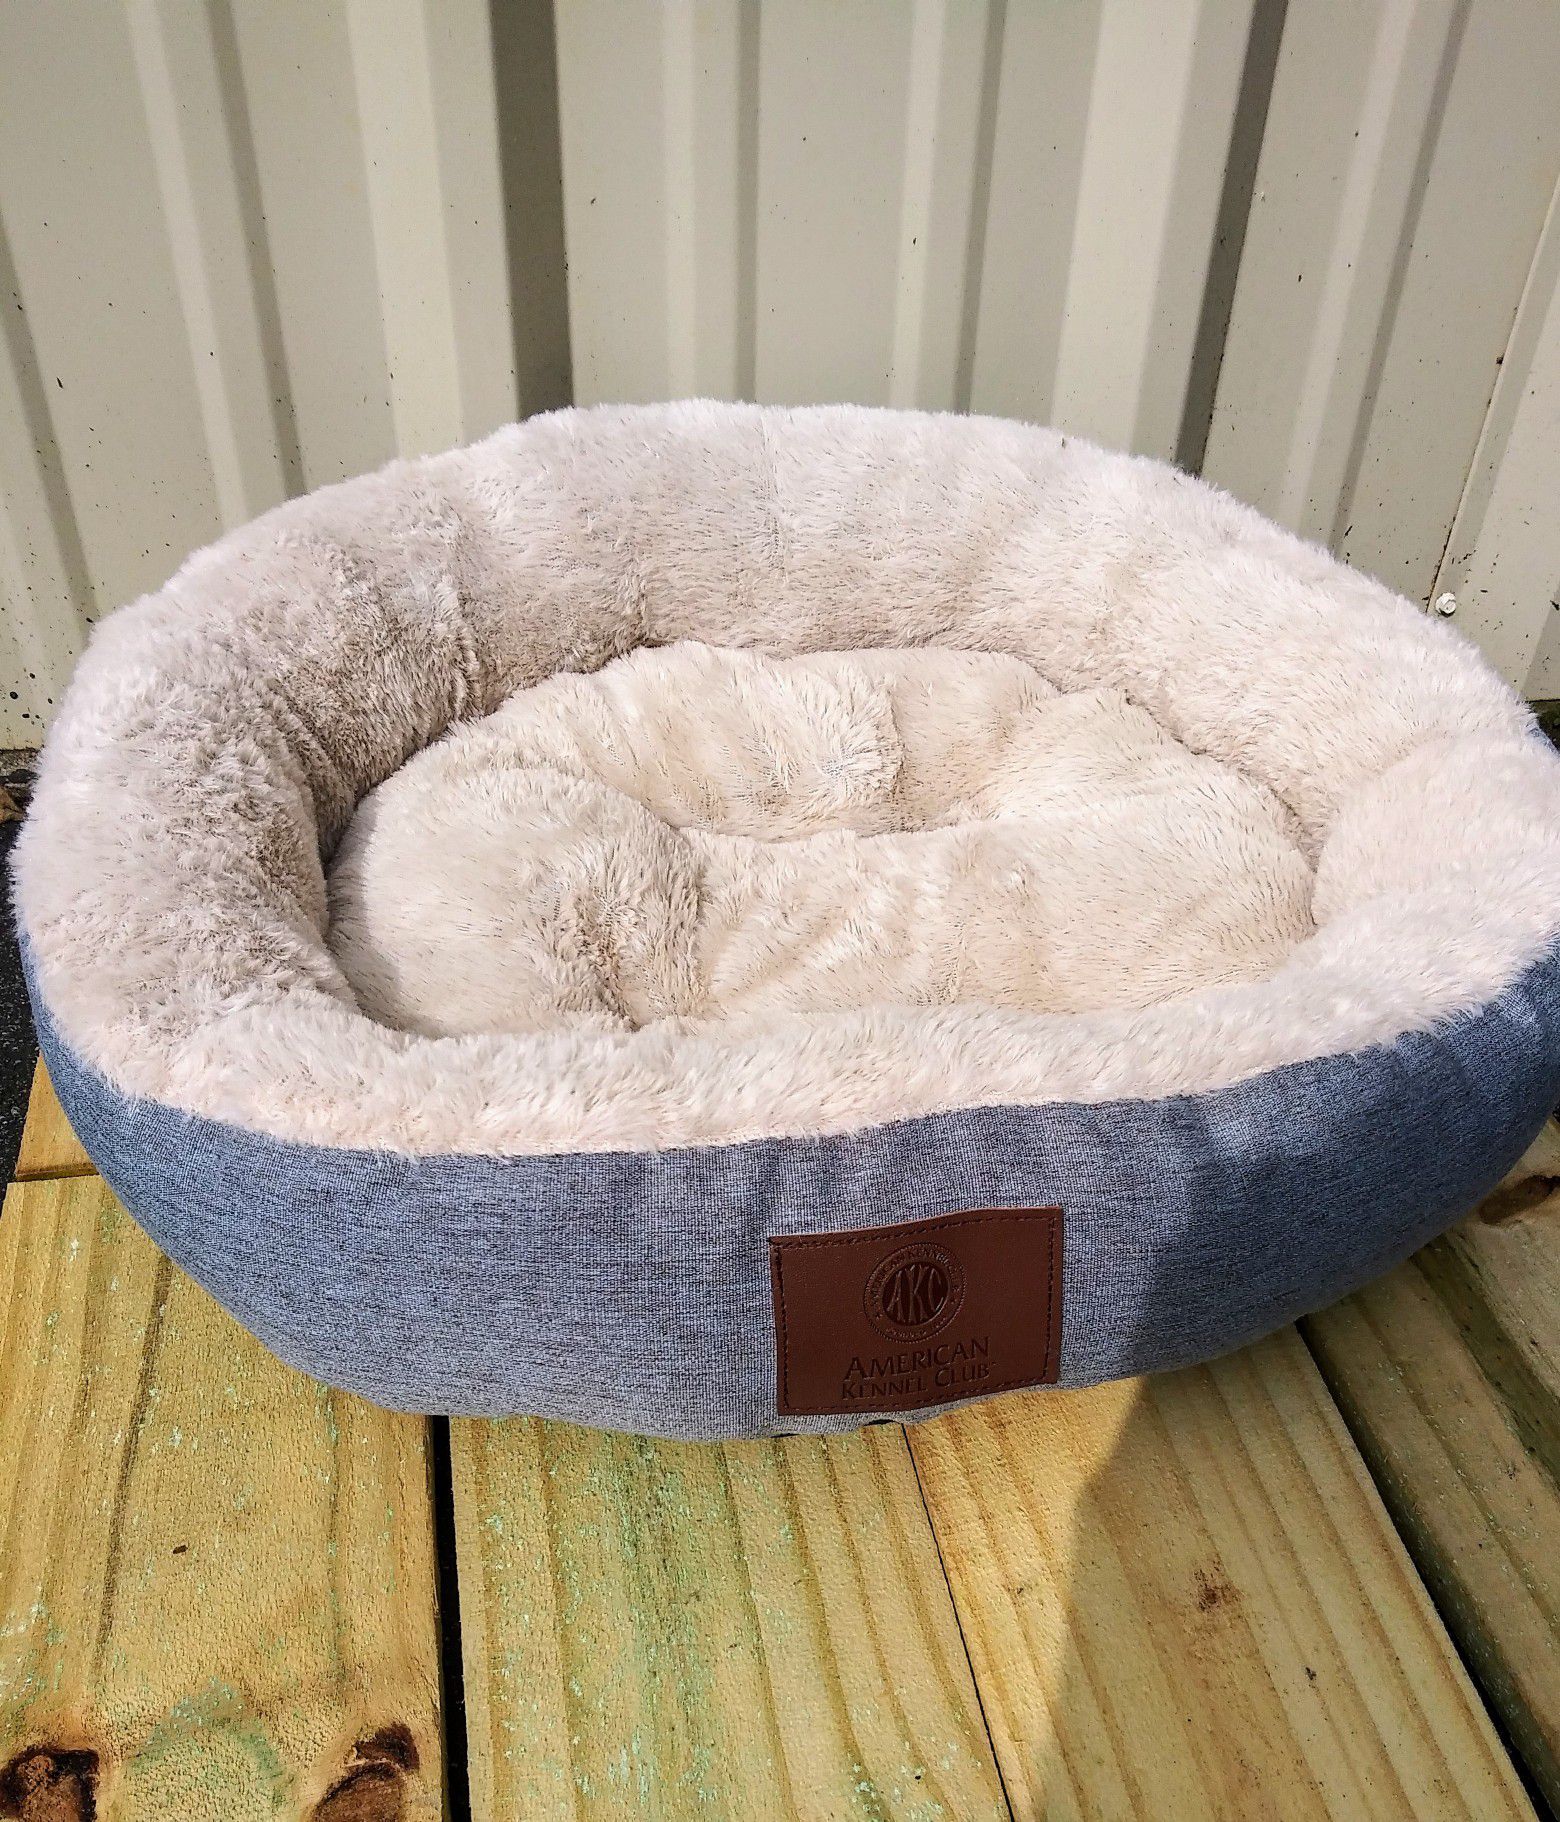 New dog bed!